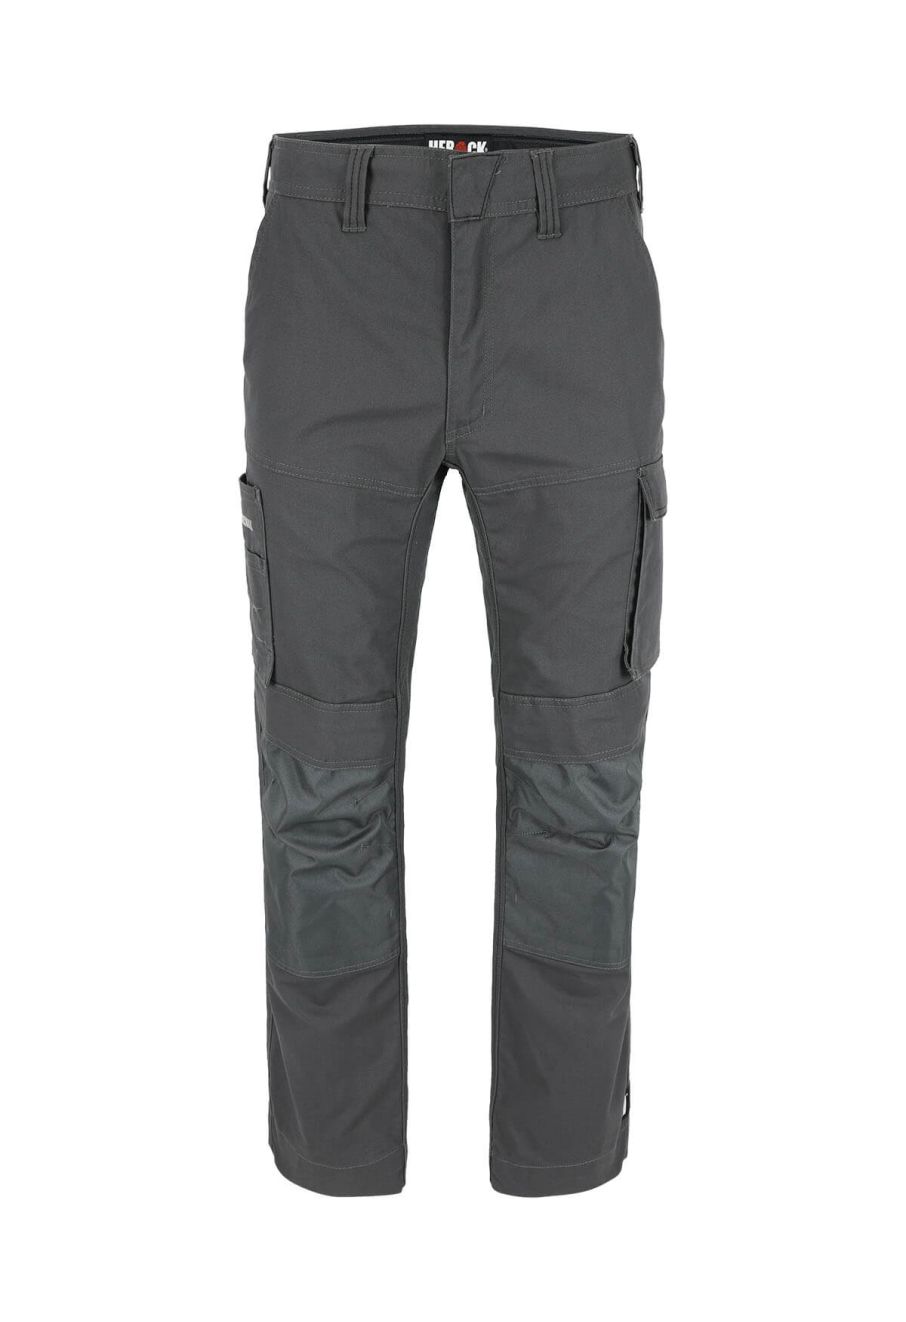 Work trousers, Multi-pocket trousers, protective work trousers